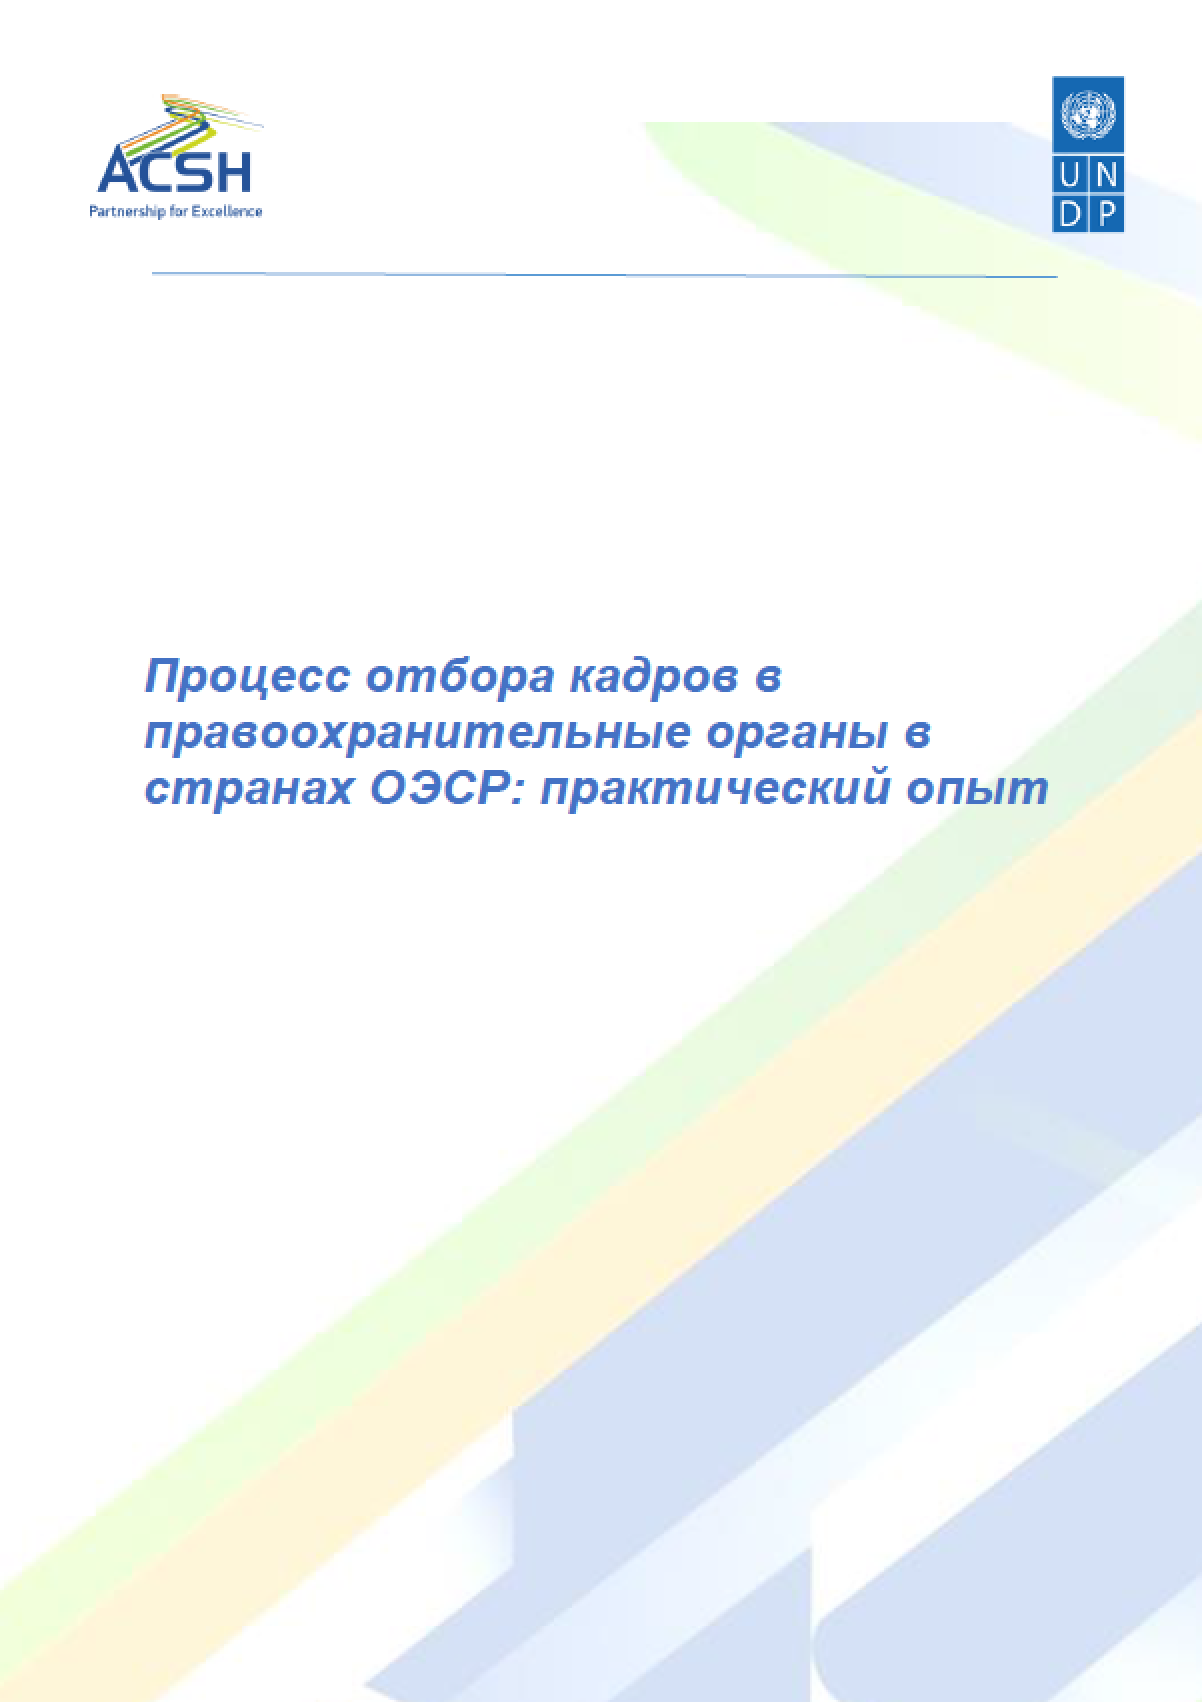 The selection process for law enforcement agencies in OECD countries: practical experience